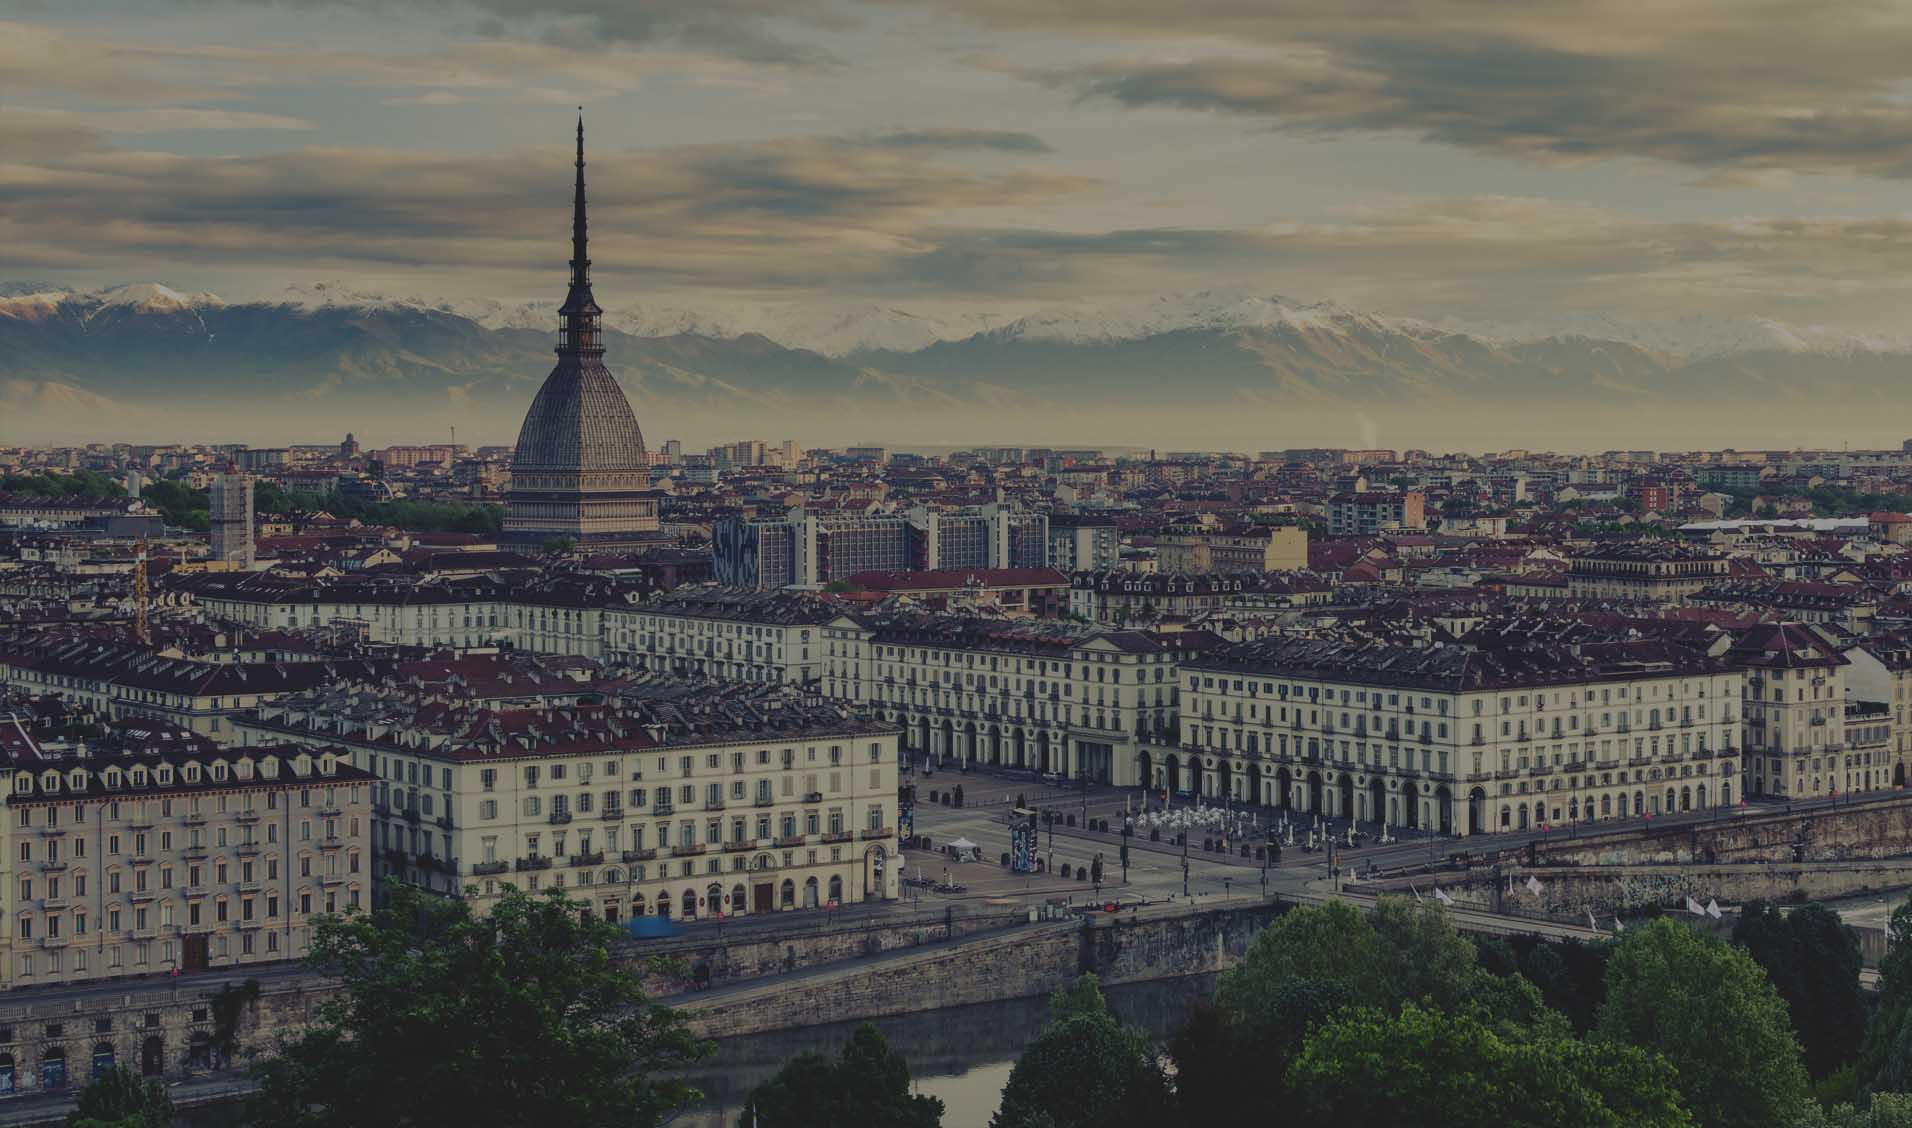 Turin, Italy’s first capital.